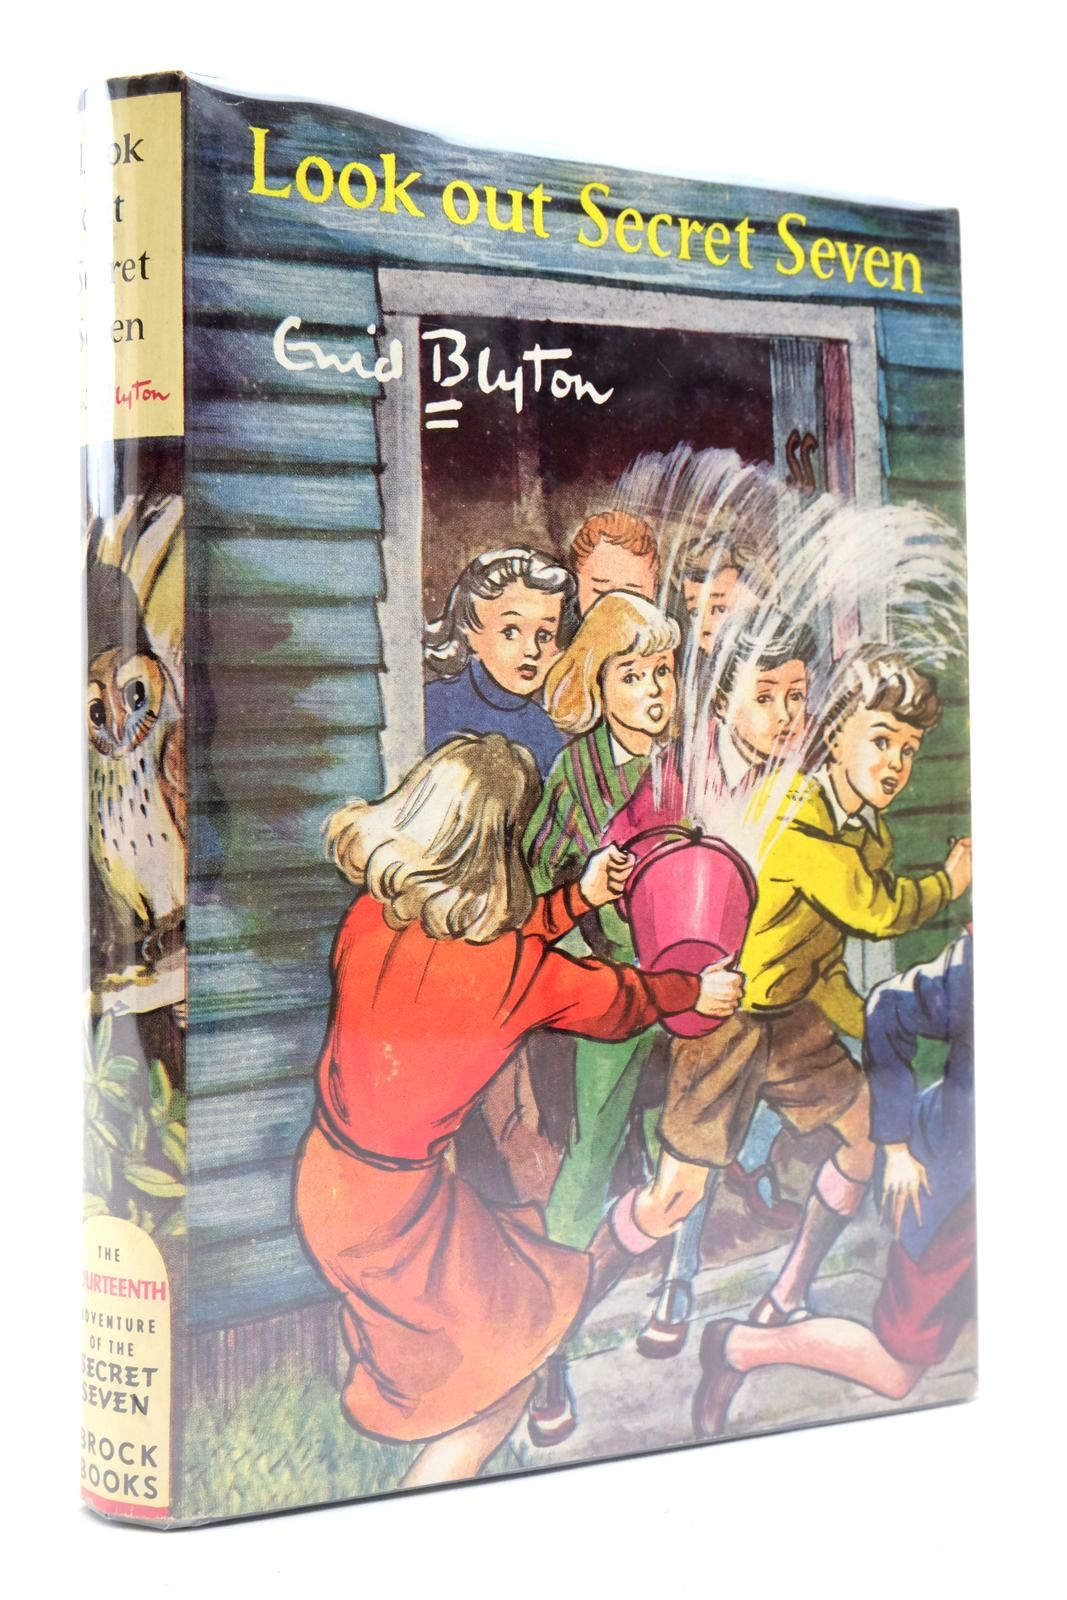 Photo of LOOK OUT SECRET SEVEN written by Blyton, Enid illustrated by Sharrocks, Burgess published by Brockhampton Press (STOCK CODE: 2137929)  for sale by Stella & Rose's Books